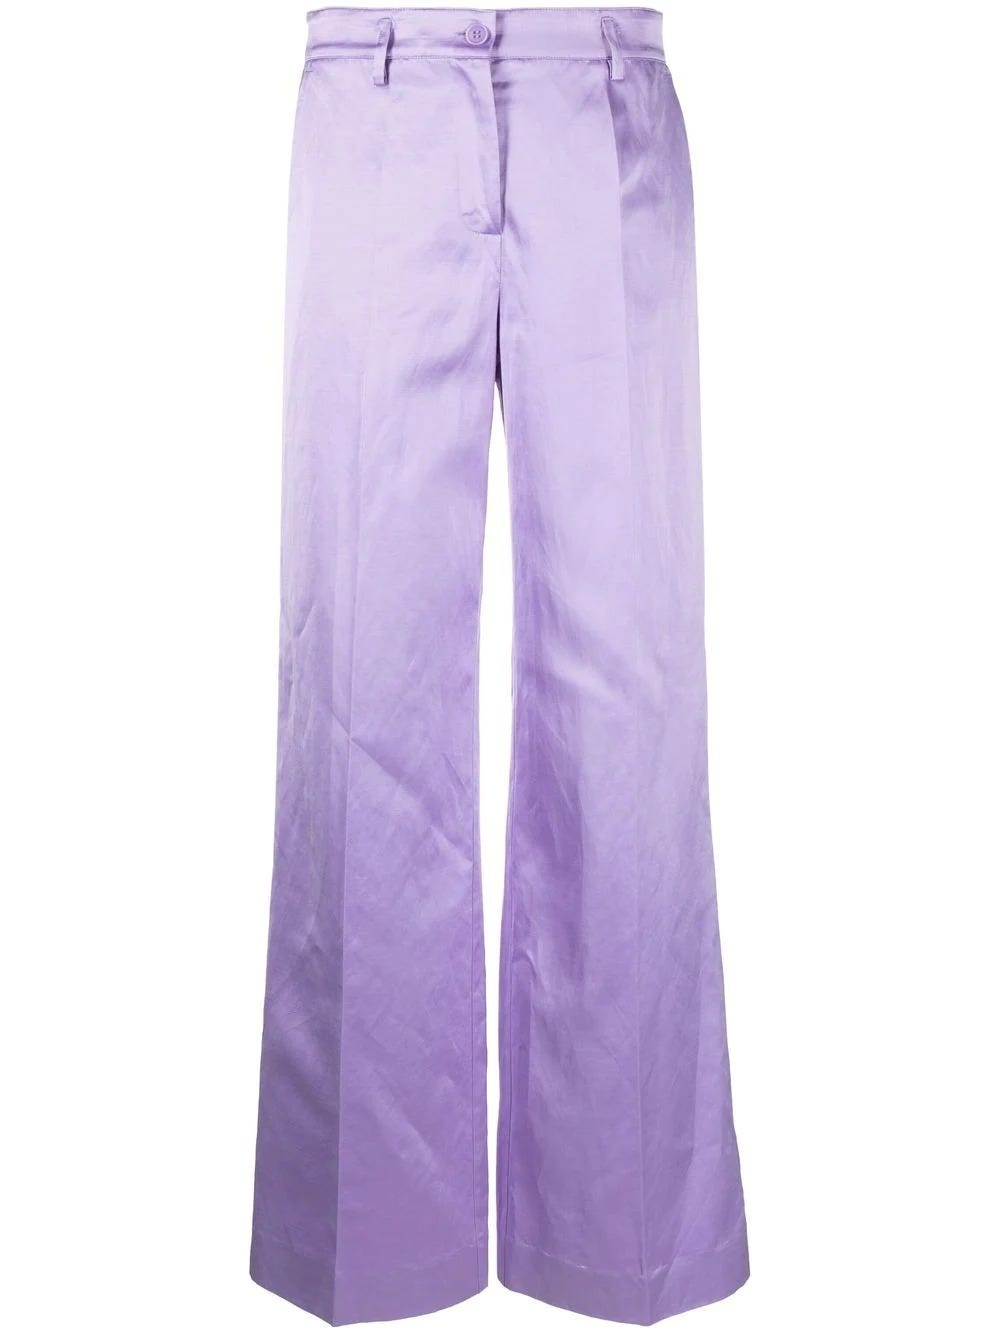 P.A.R.O.S.H LILAC SATIN WIDE-LEG TAILORED TROUSERS